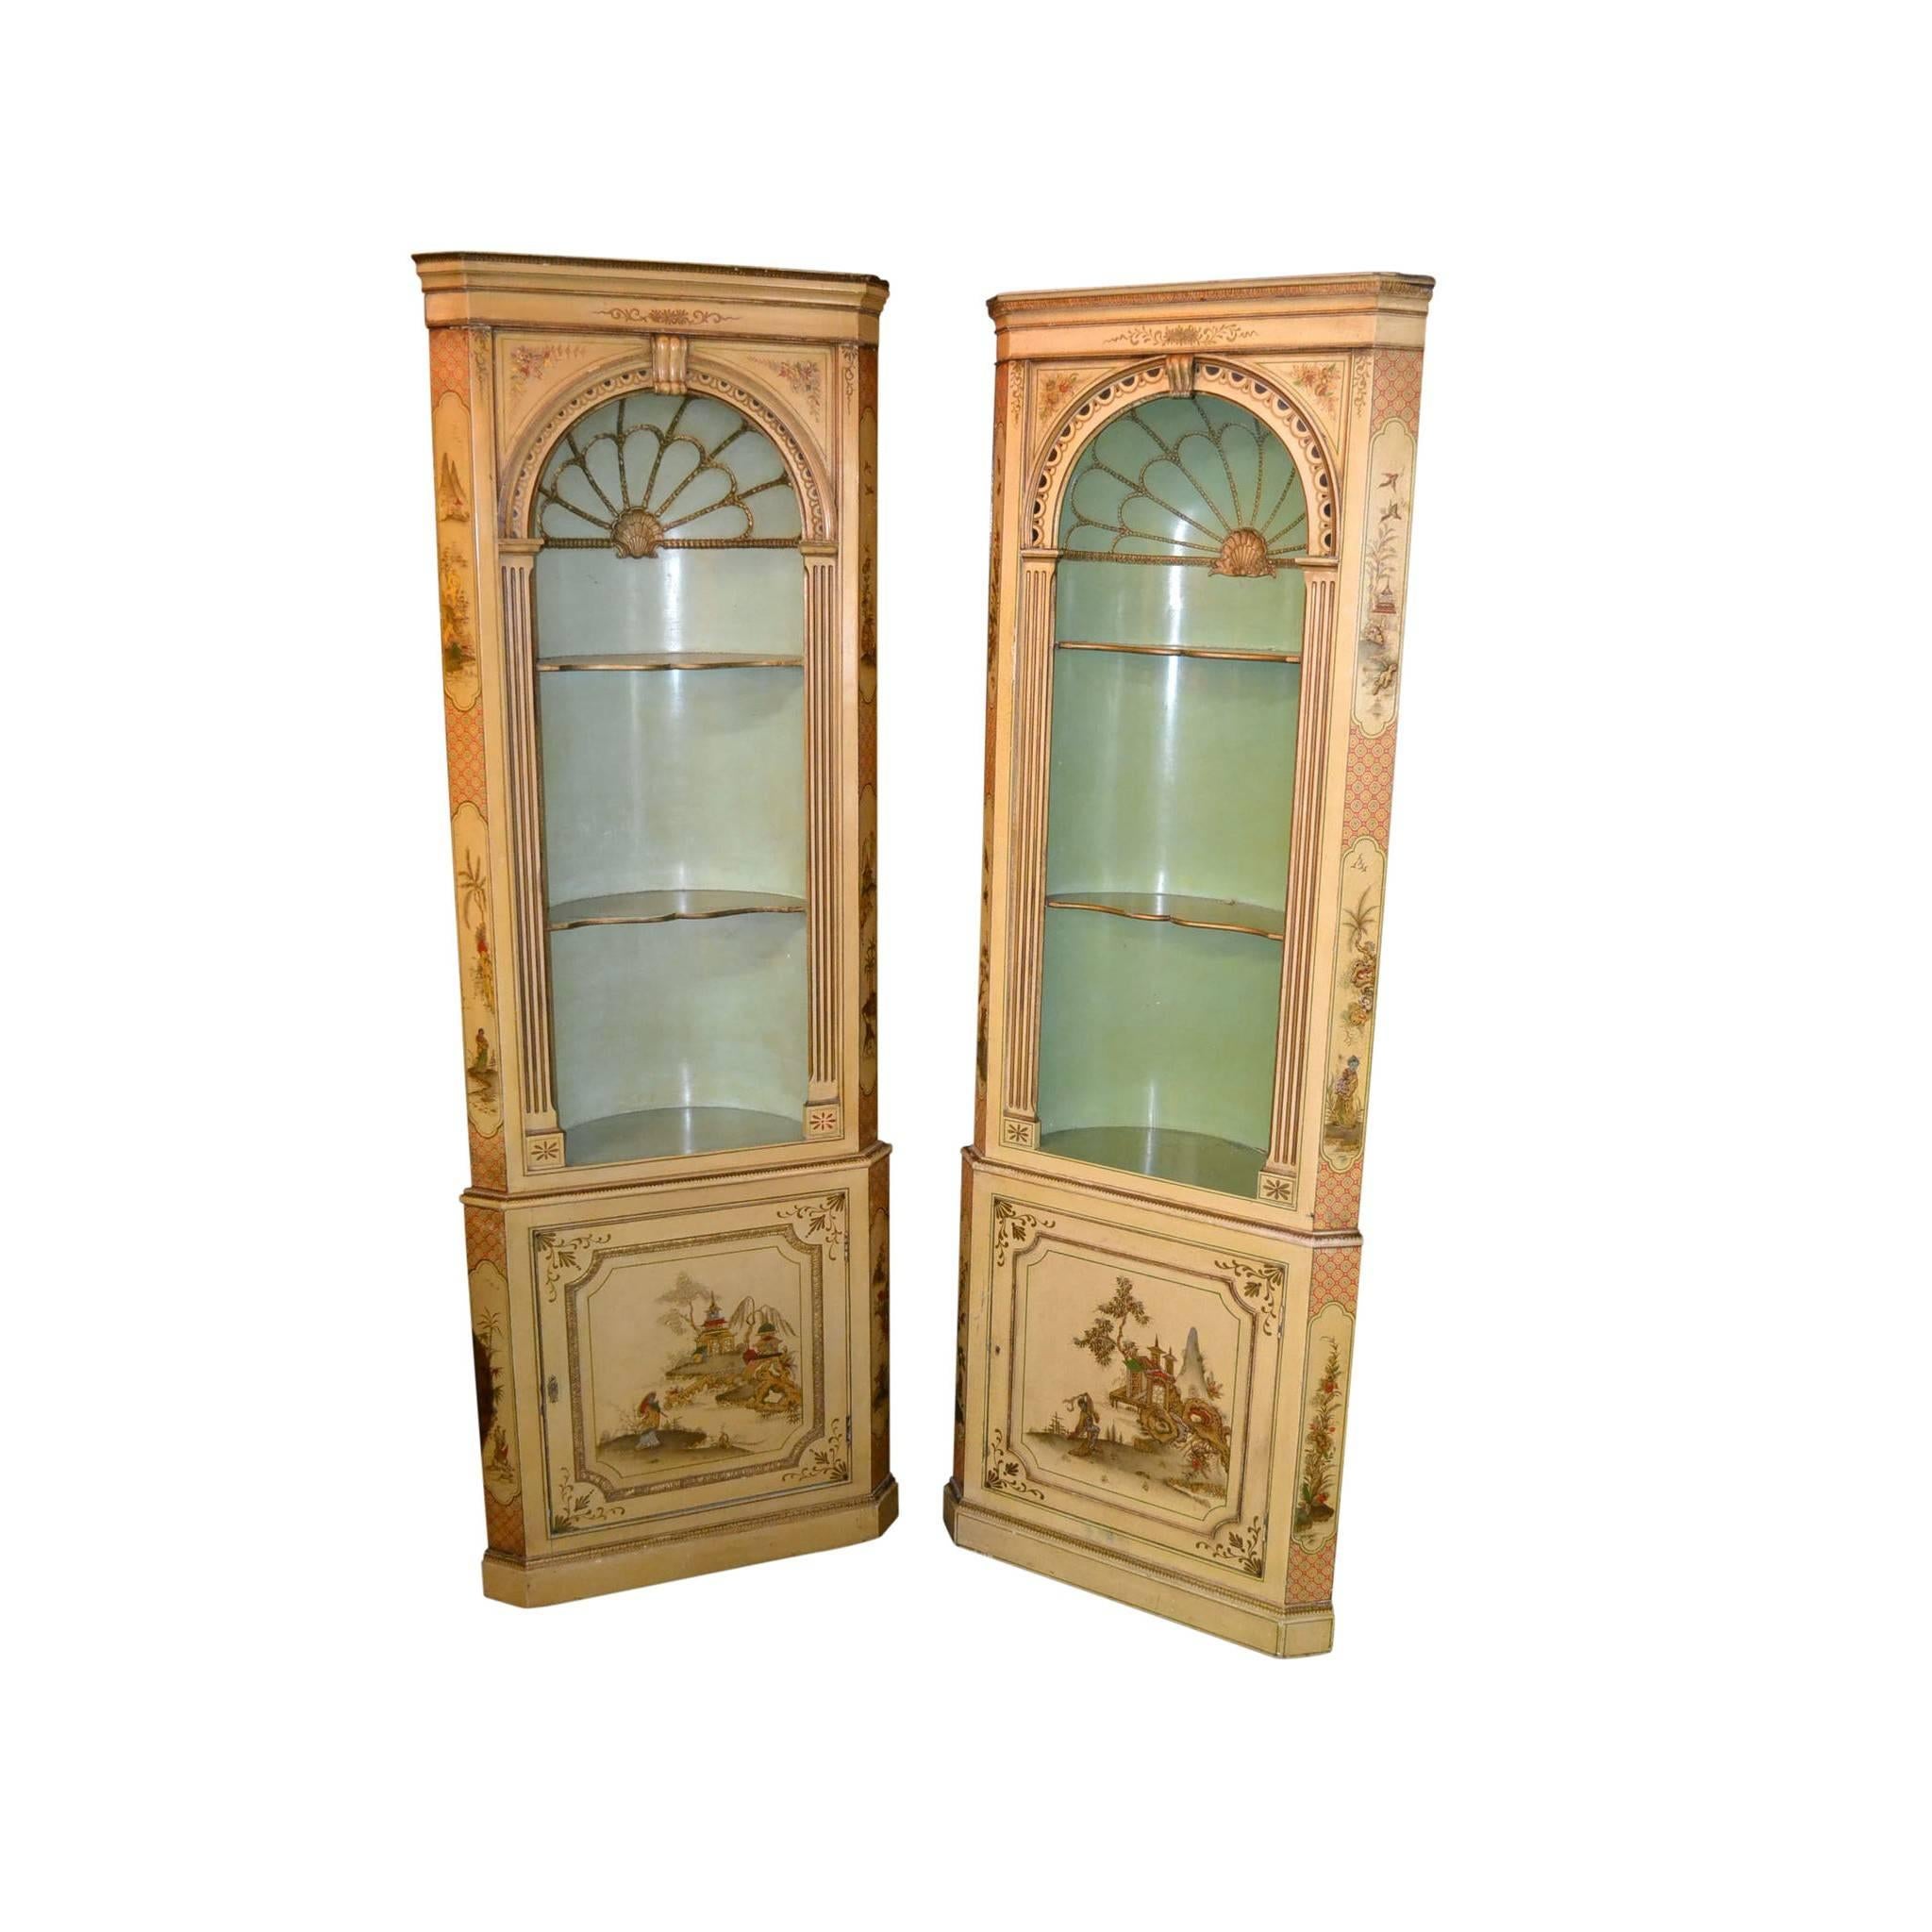 Fabulous pair of 19th century English corner cabinets with partially domed interiors with shell carvings and contoured shelves. Each with superb overall pale yellow Chinoiserie decoration depicting treed and flowering landscapes with pagodas and